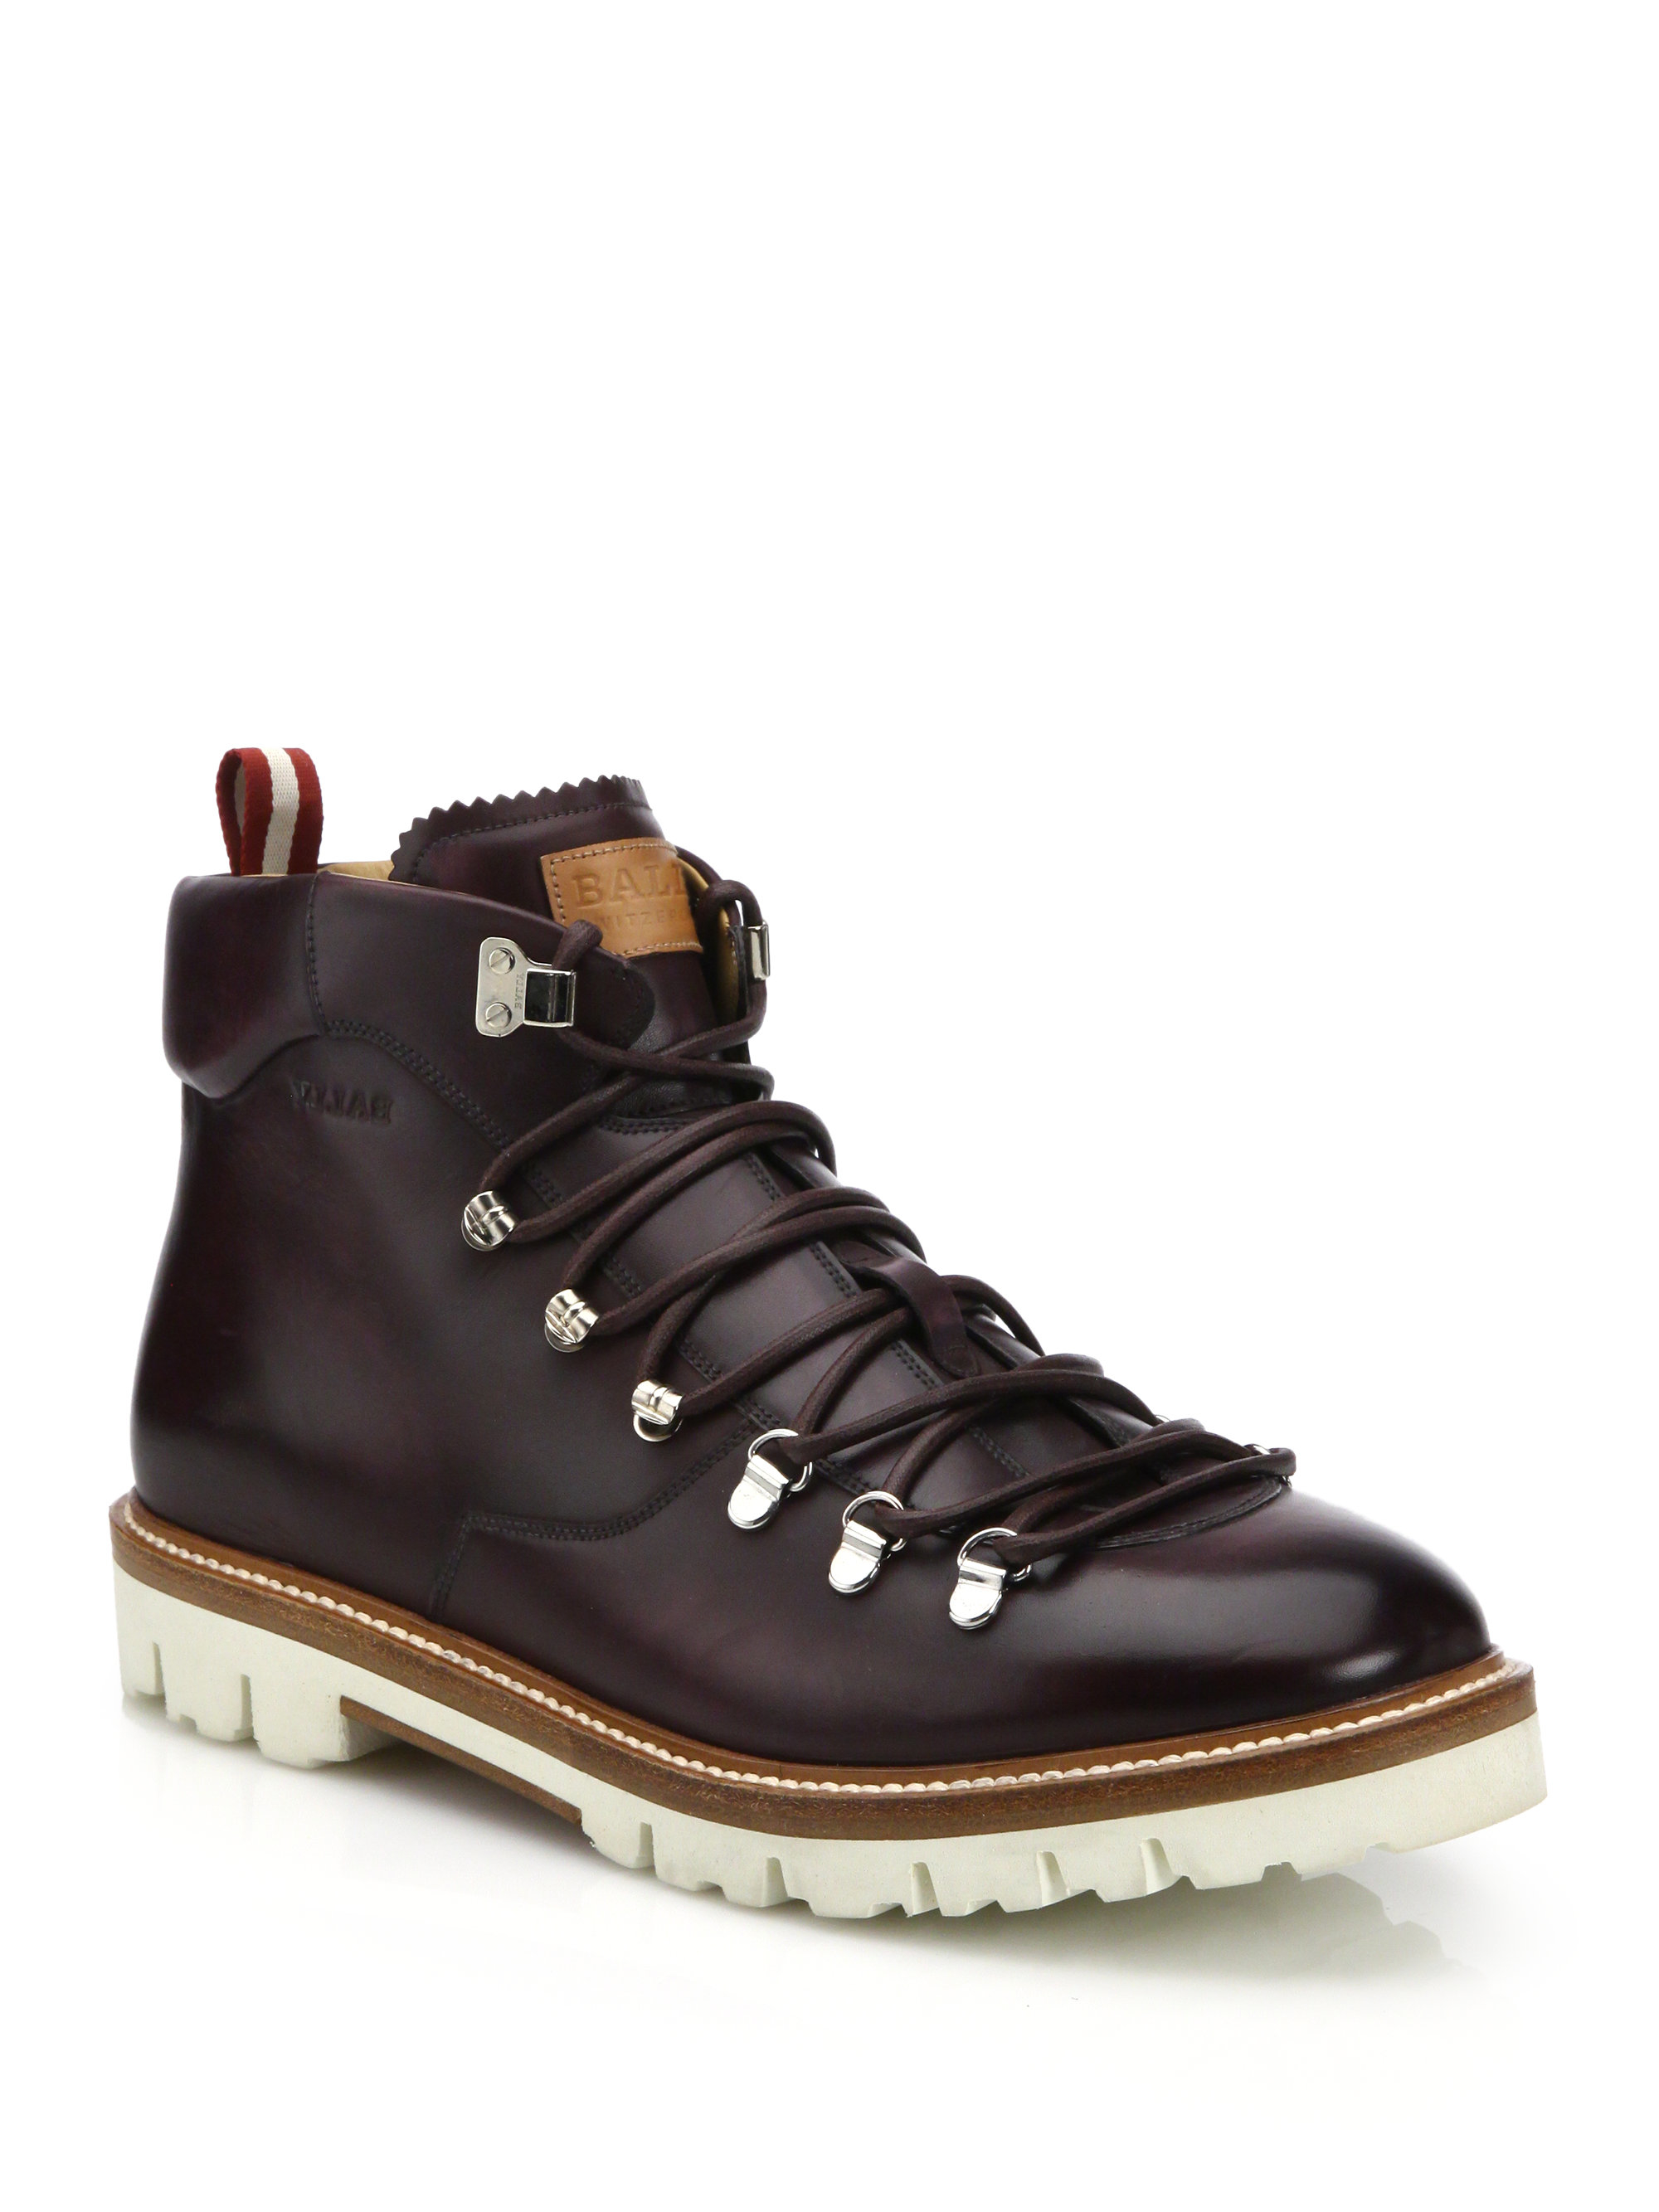 Bally J. Cole For Leather Hiking Boots in Dark Cherry (Black) for Men - Lyst